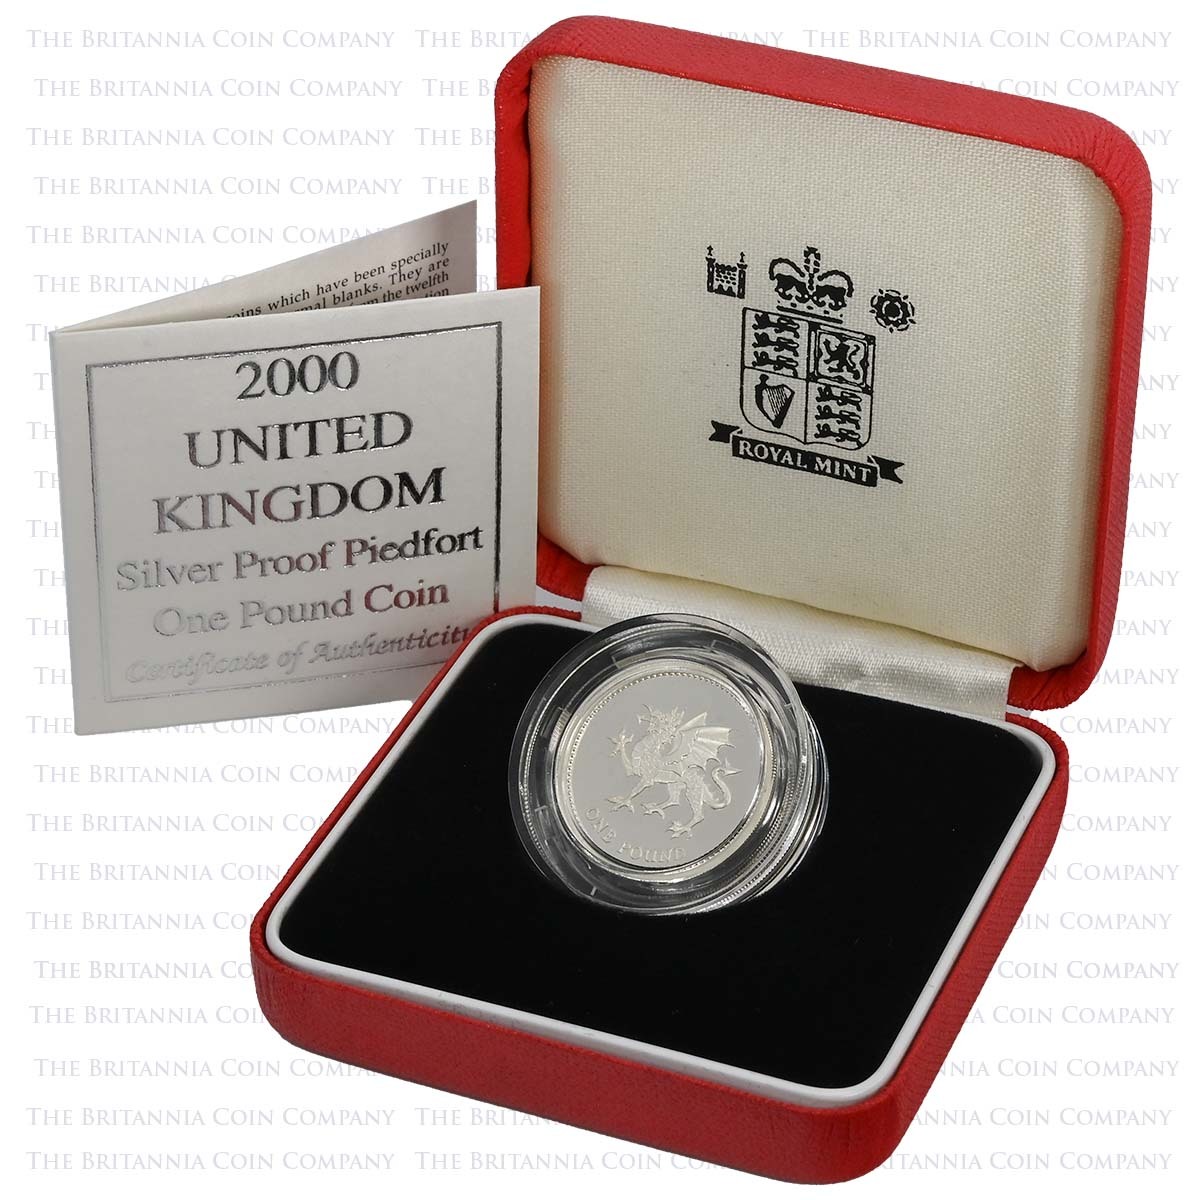 2000 Welsh Dragon £1 Piedfort Silver Proof Boxed